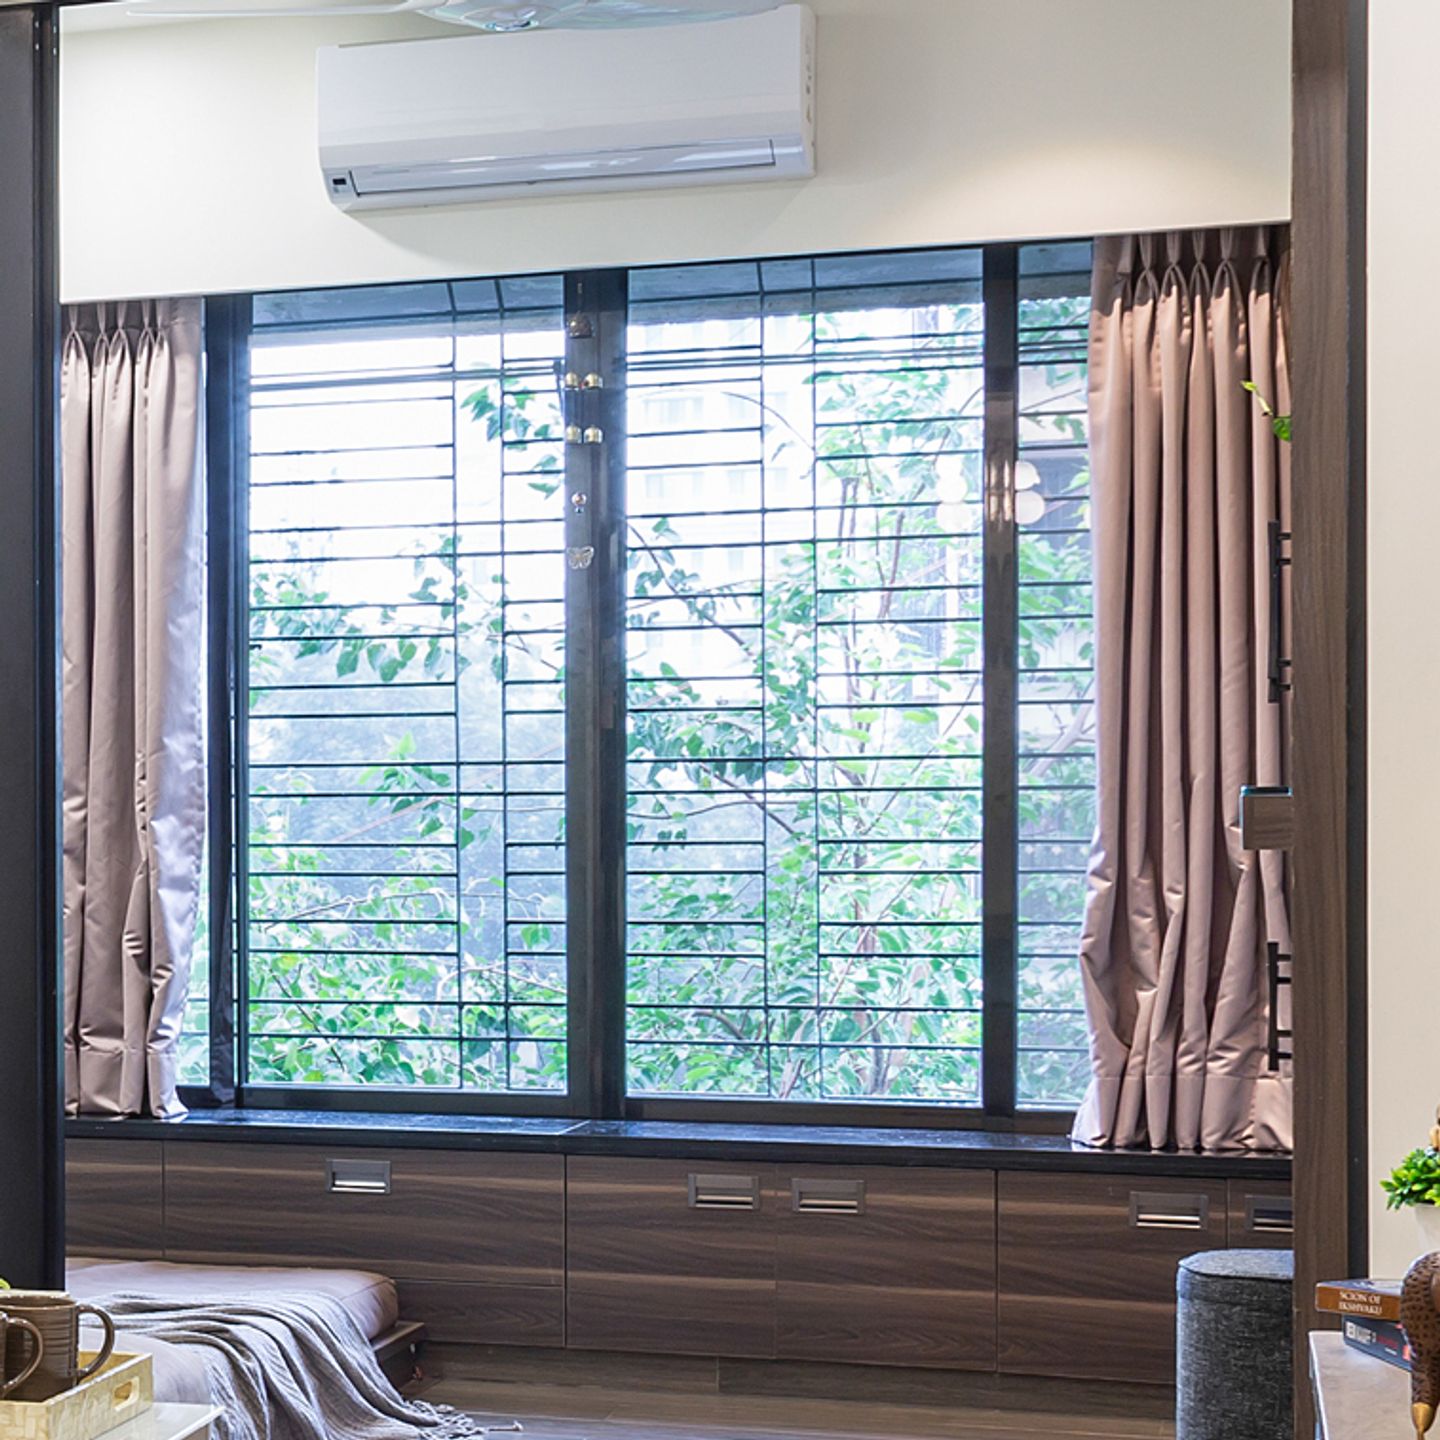 Black Window Grill Design With Shutters - Livspace